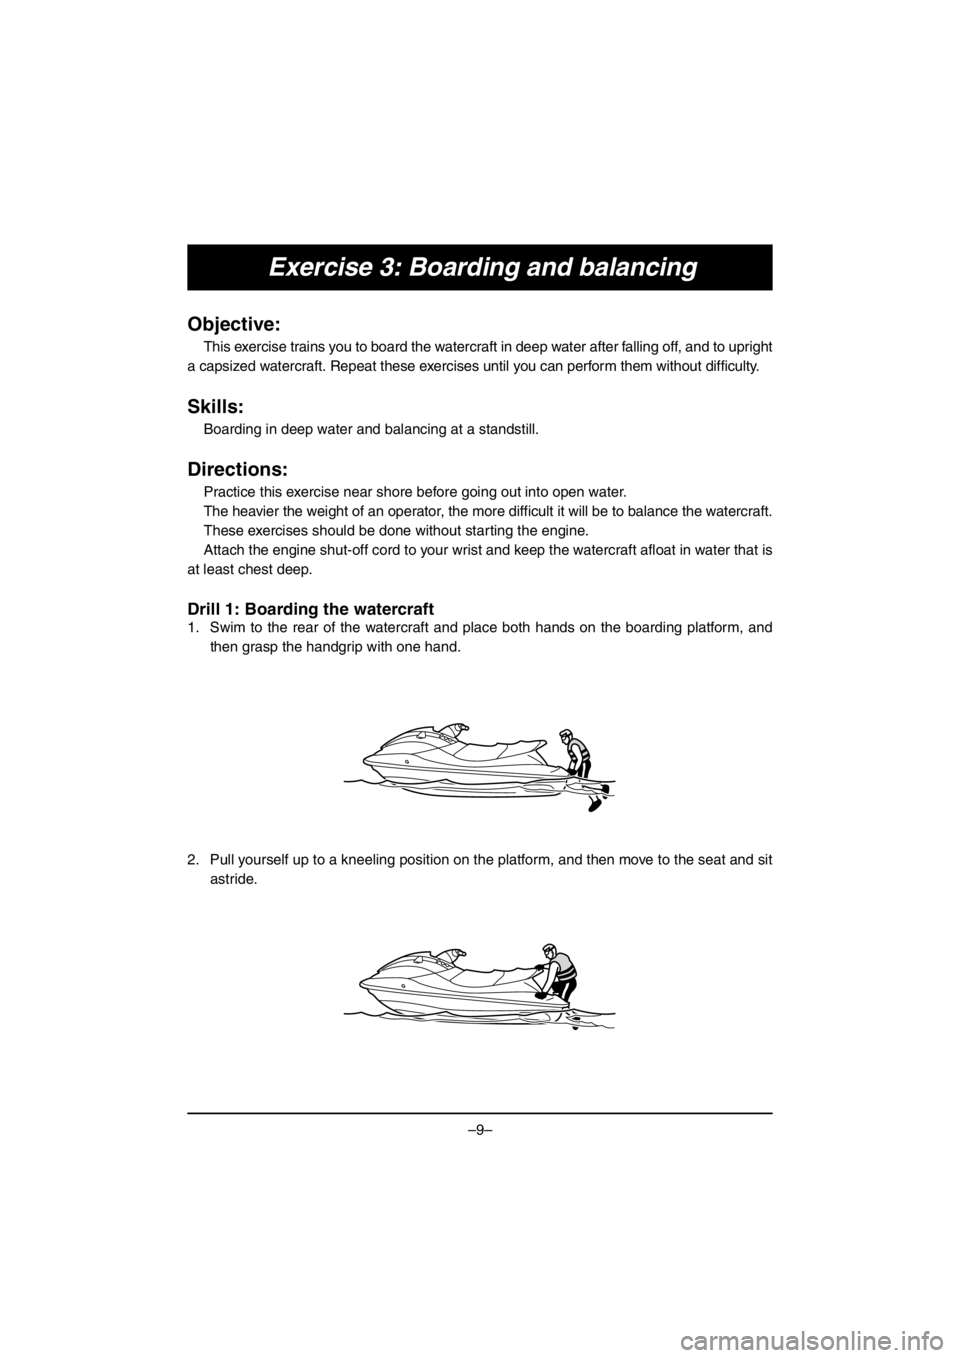 YAMAHA VX DELUXE 2016  Notices Demploi (in French) –9–
Exercise 3: Boarding and balancing
Objective:
This exercise trains you to board the watercraft in deep water after falling off, and to upright
a capsized watercraft. Repeat these exercises unt